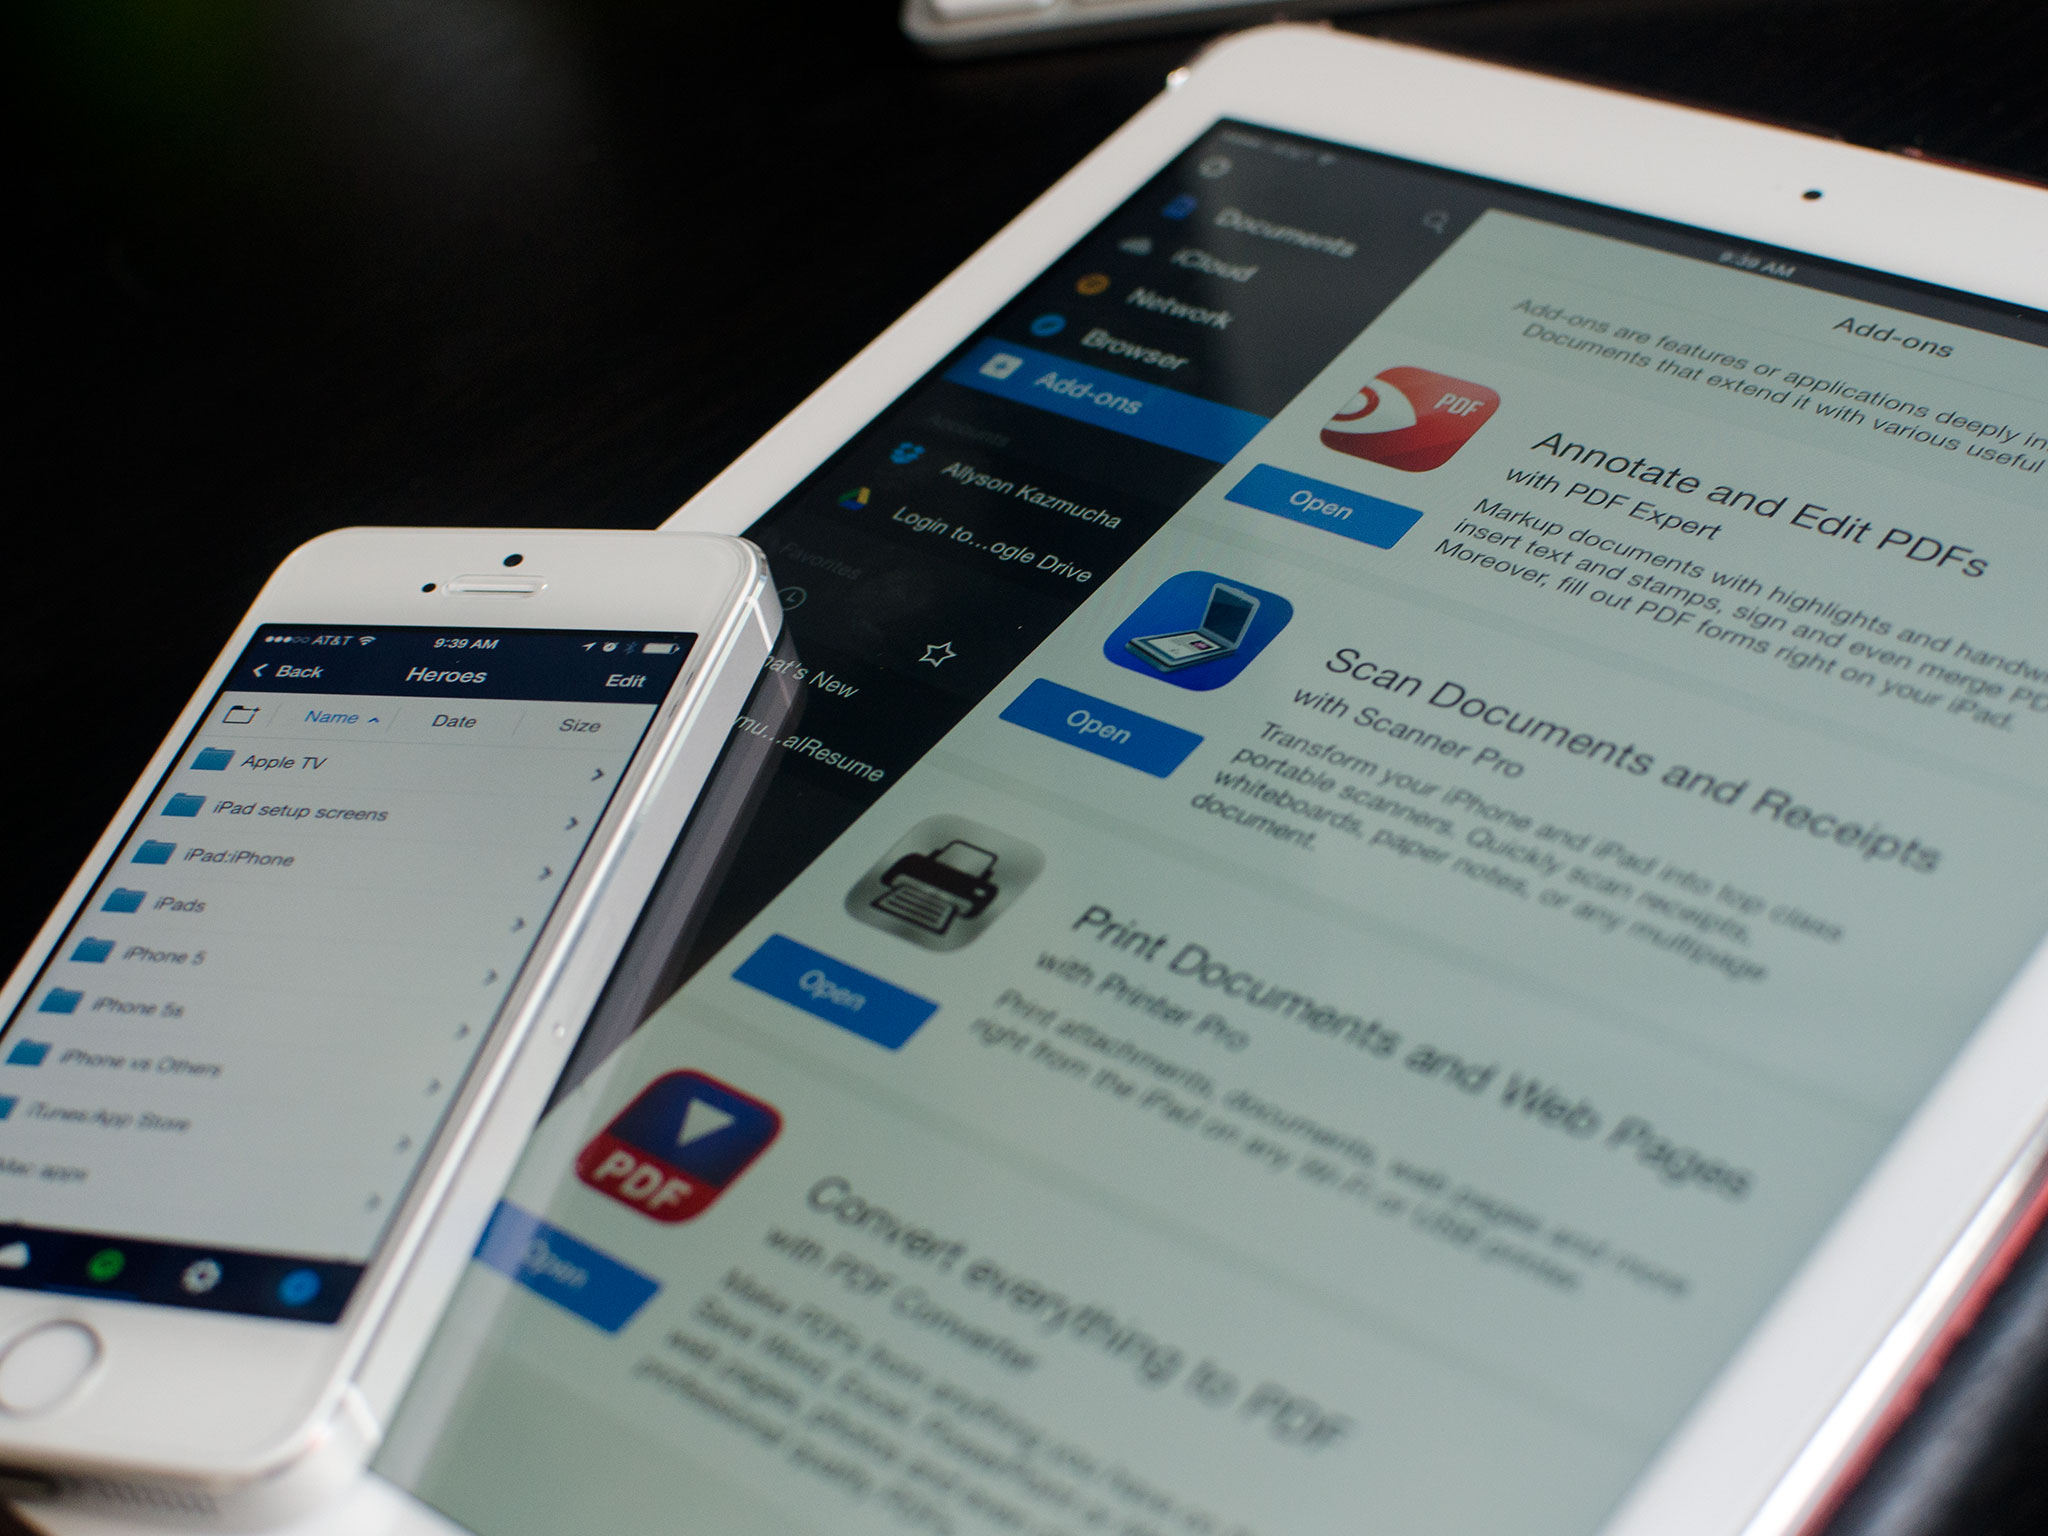 New and updated apps: Documents, iMPC Pro, Uber and more!